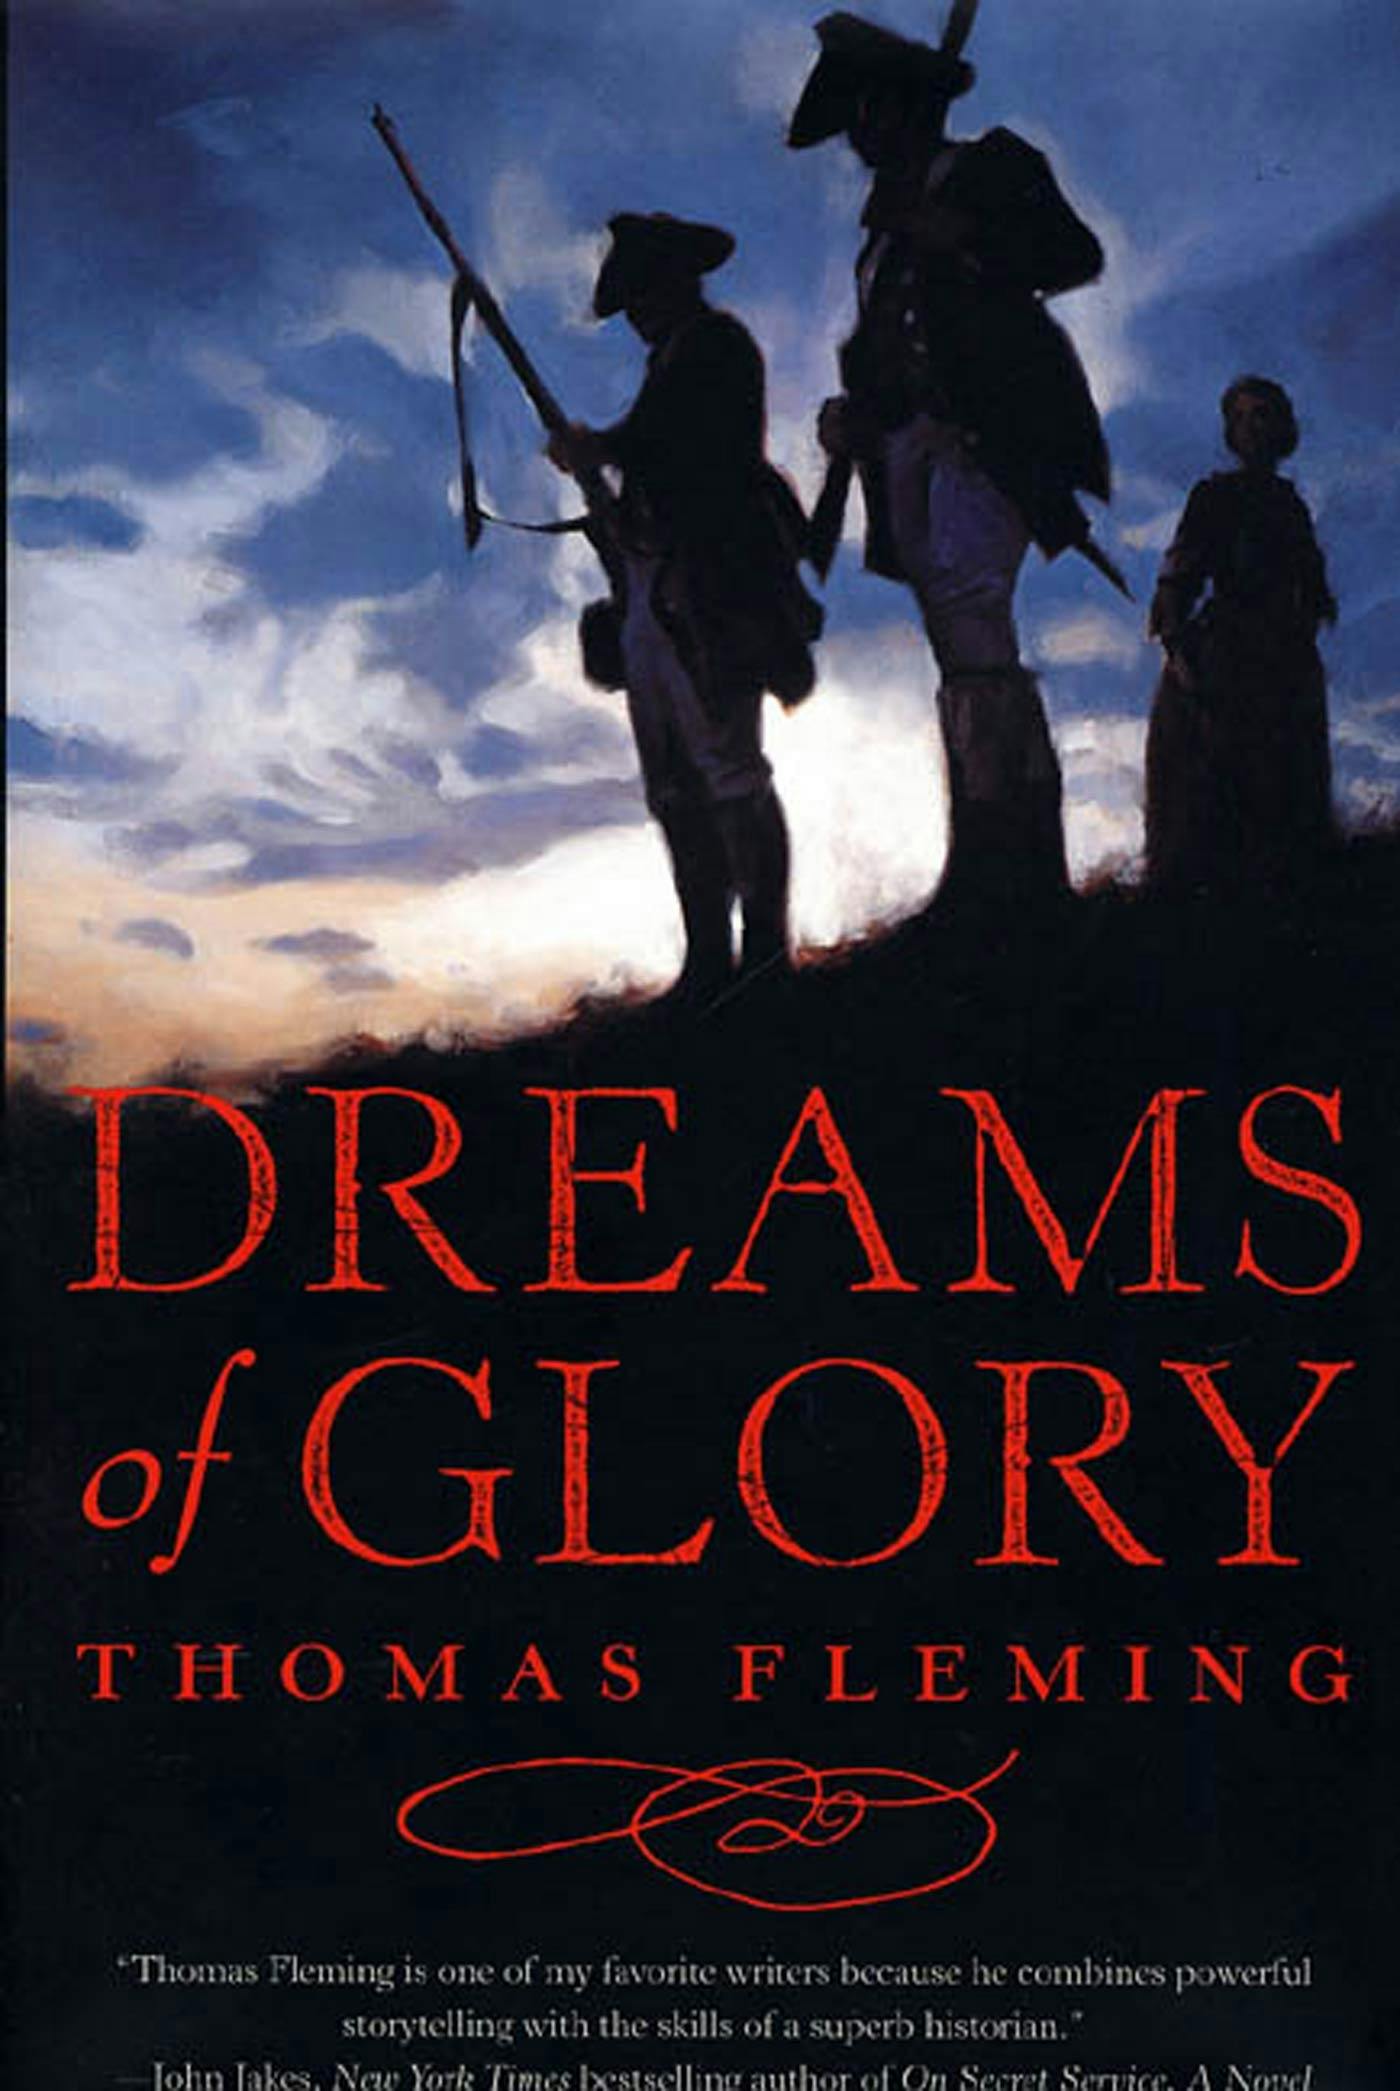 Cover for the book titled as: Dreams of Glory